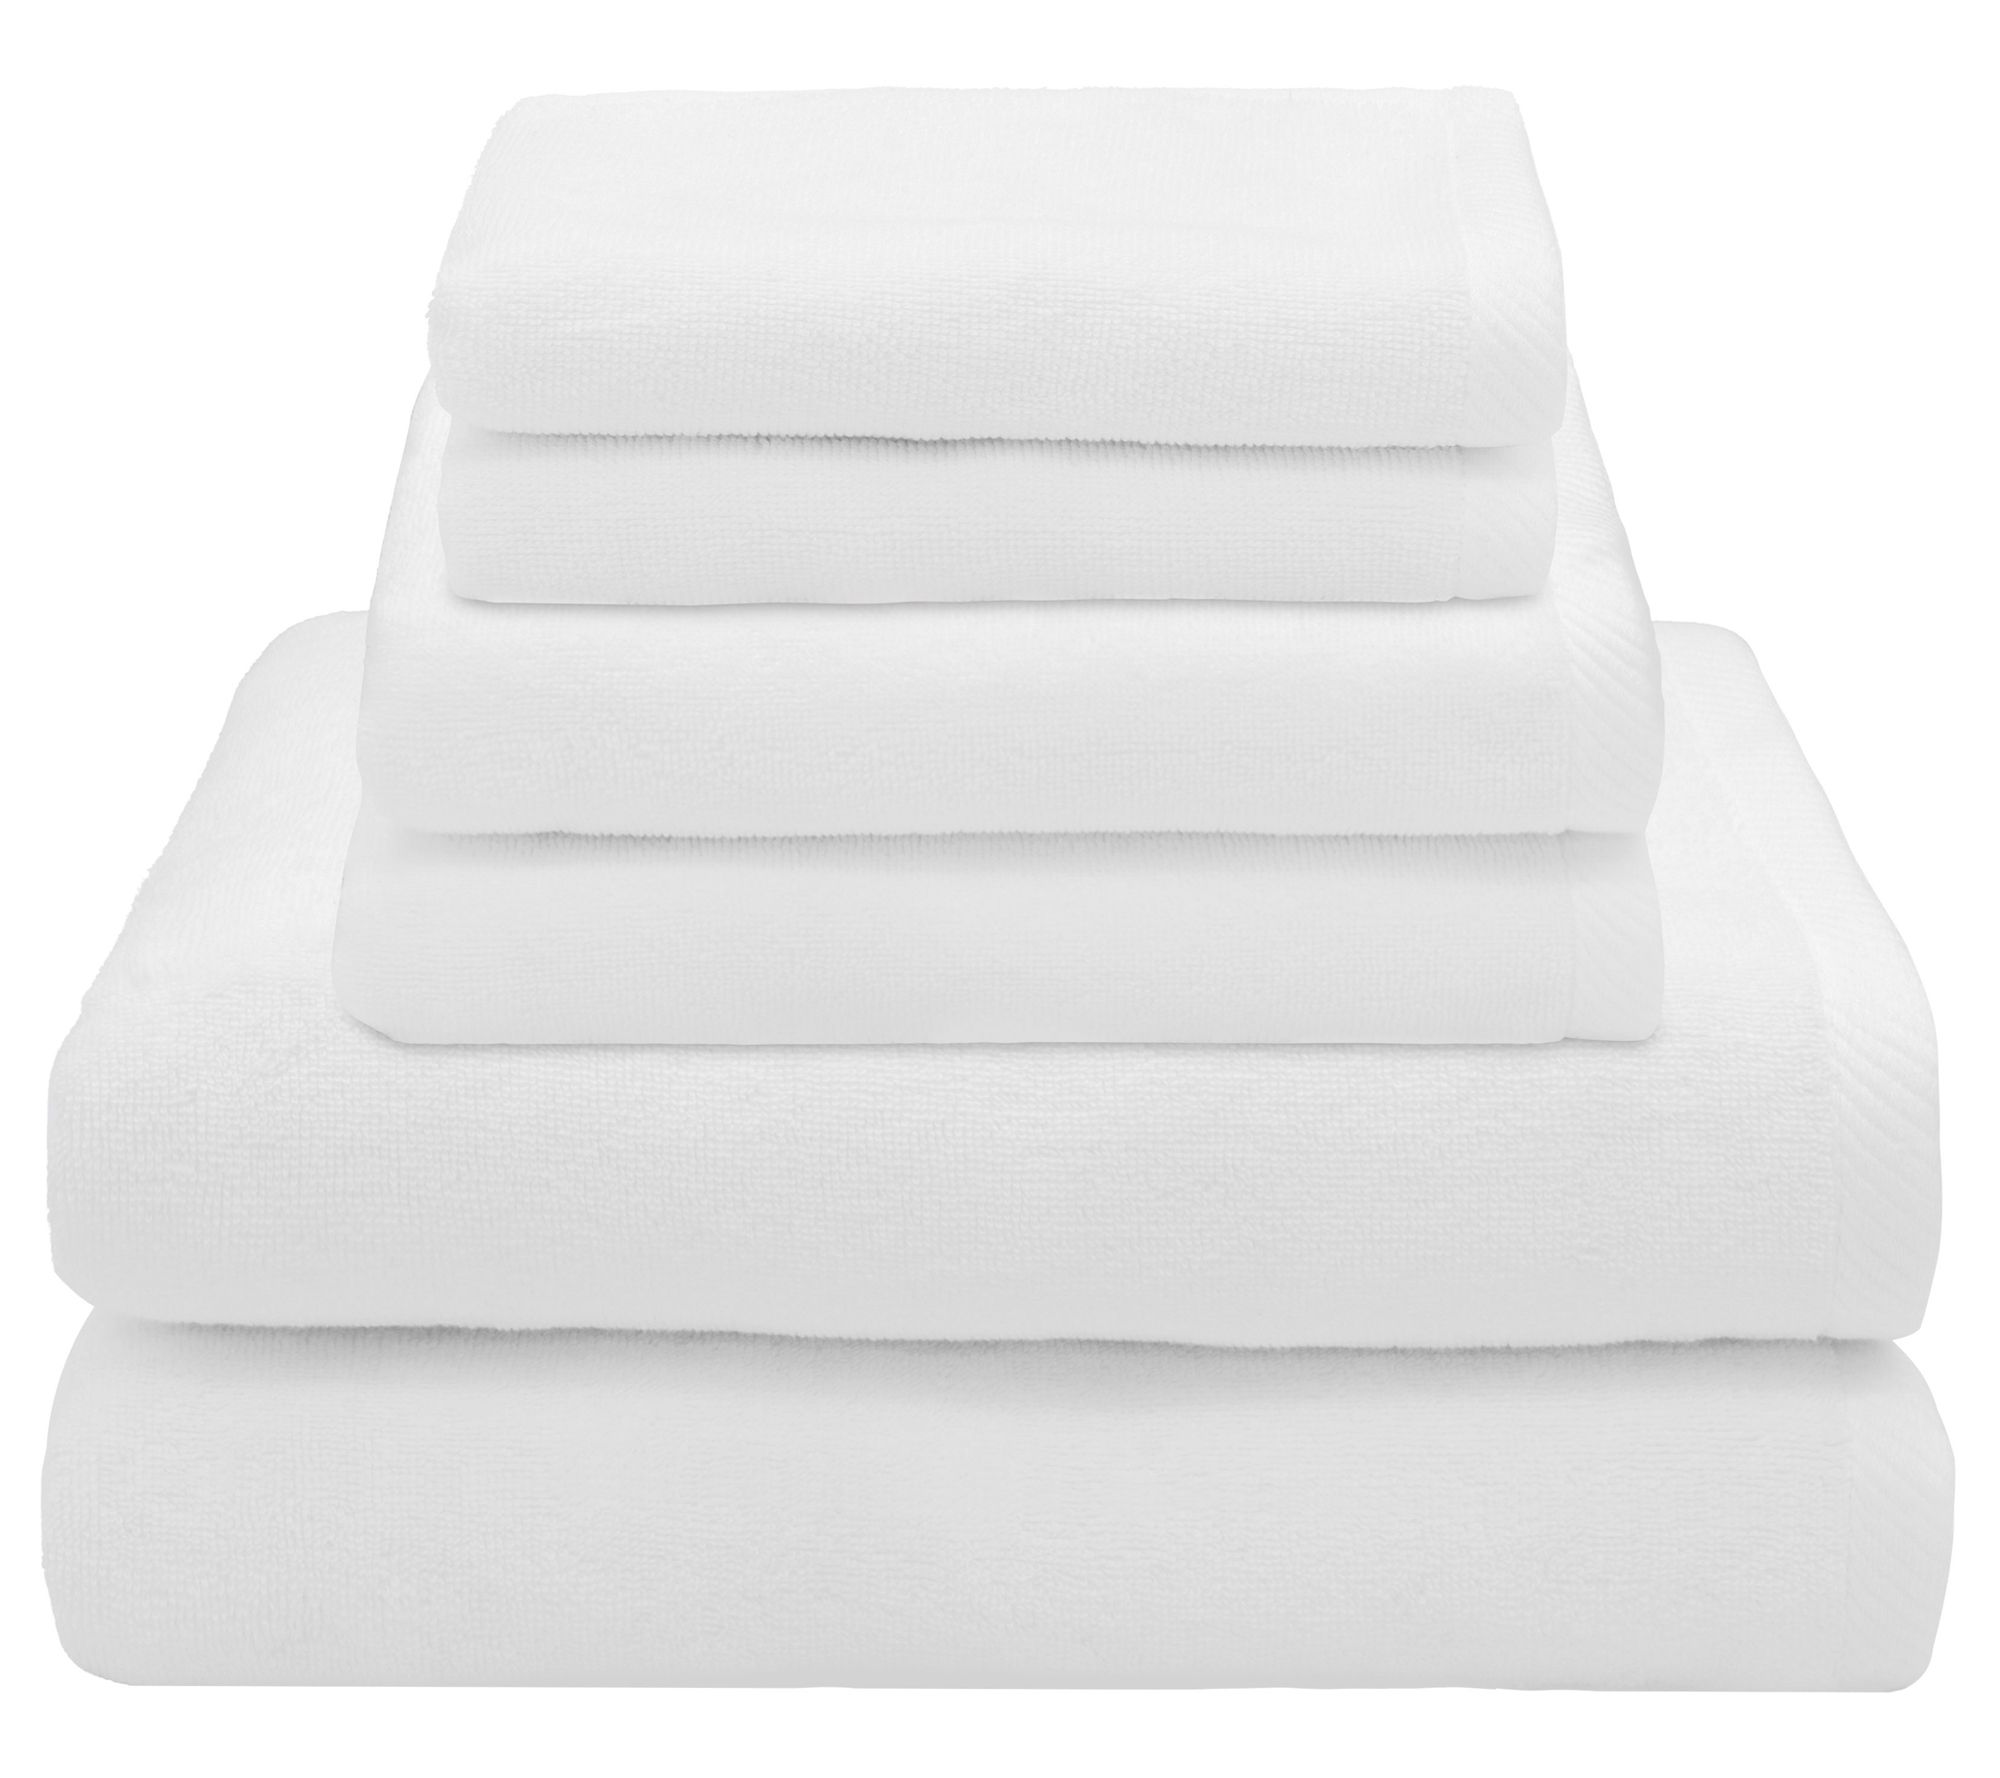 Linum Home Textiles Terry Bath Towel in White (Set of 4)